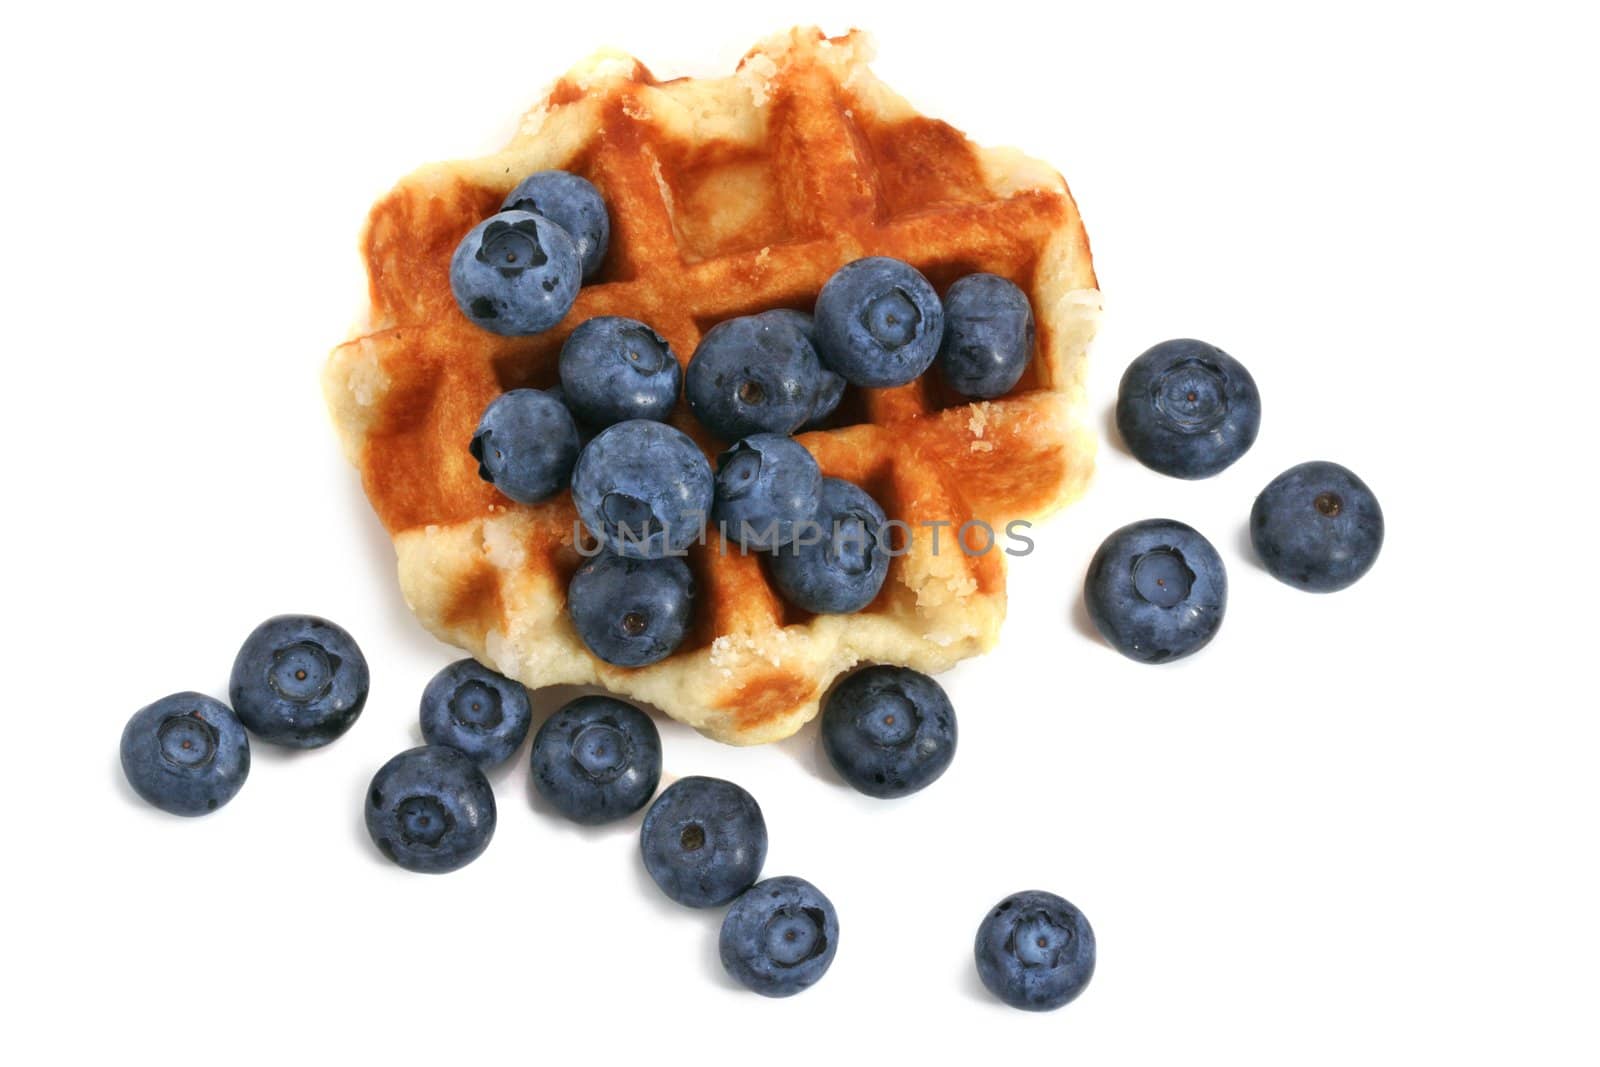 waffle and blueberries by lanalanglois